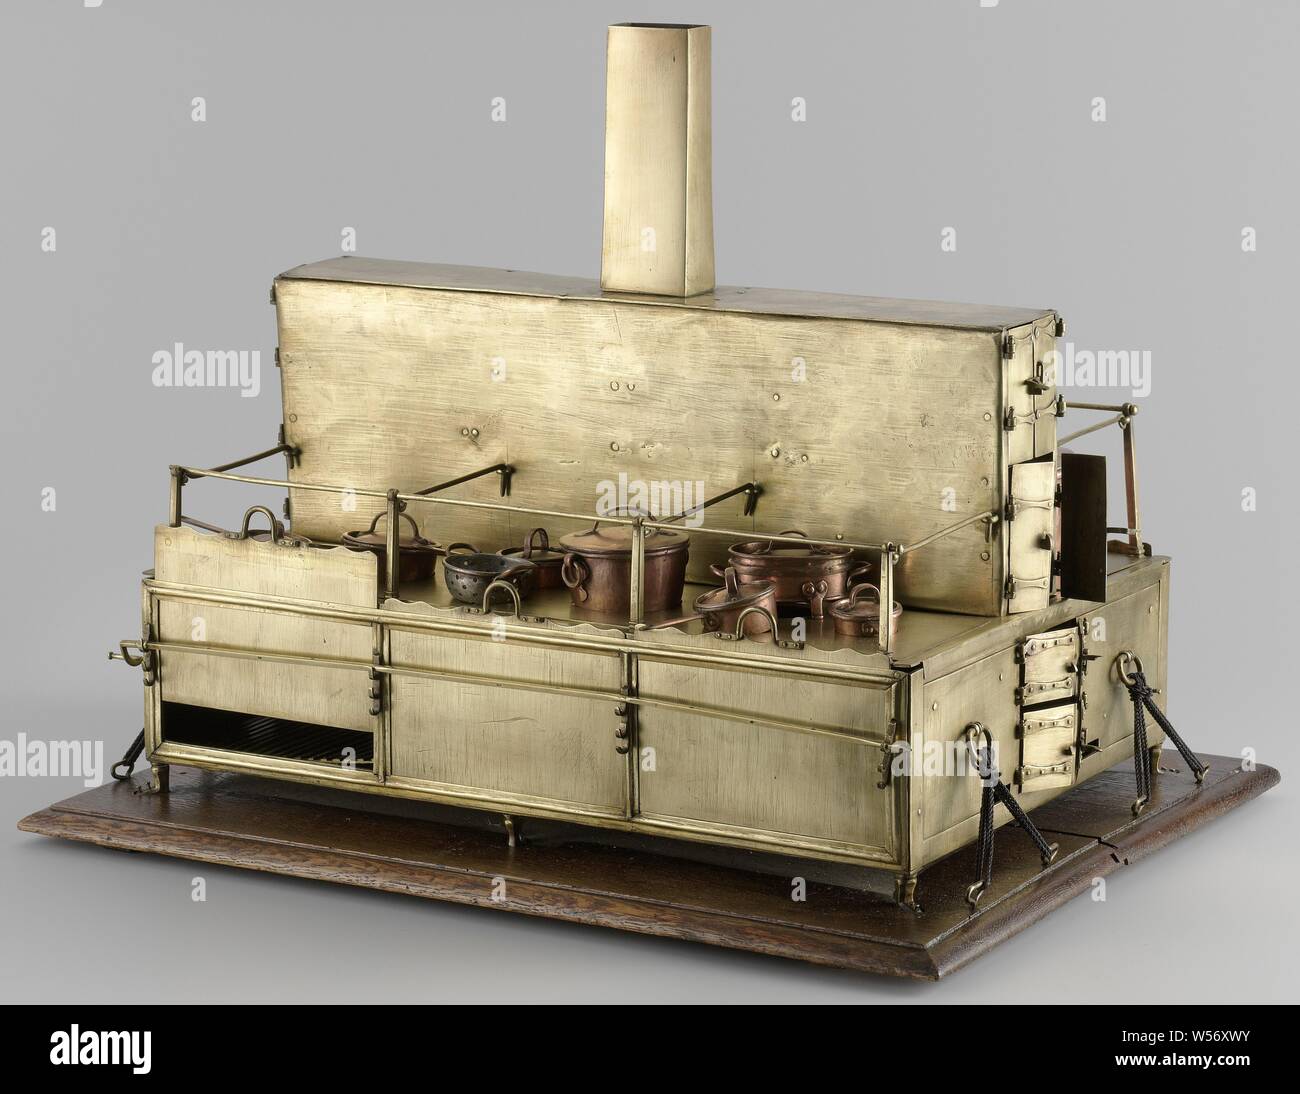 Model of a ship's galley, Model of a Ship's Galley, Model of a ship galley on a floorboard. It is a low rectangular cupboard with a raised smoke box in the middle over the entire length, on which the chimney stands. The whole is bolted on deck with small legs. The two sides on each side of the smoke cabinet are identical except for the hot plates: they consist of three fireplaces with grilles and doors that slide vertically. The hot plates are simple metal plates with round holes for the pans and surrounded by a railing. Between the two rows of fireplaces under the smoking cabinet, bread ovens Stock Photo